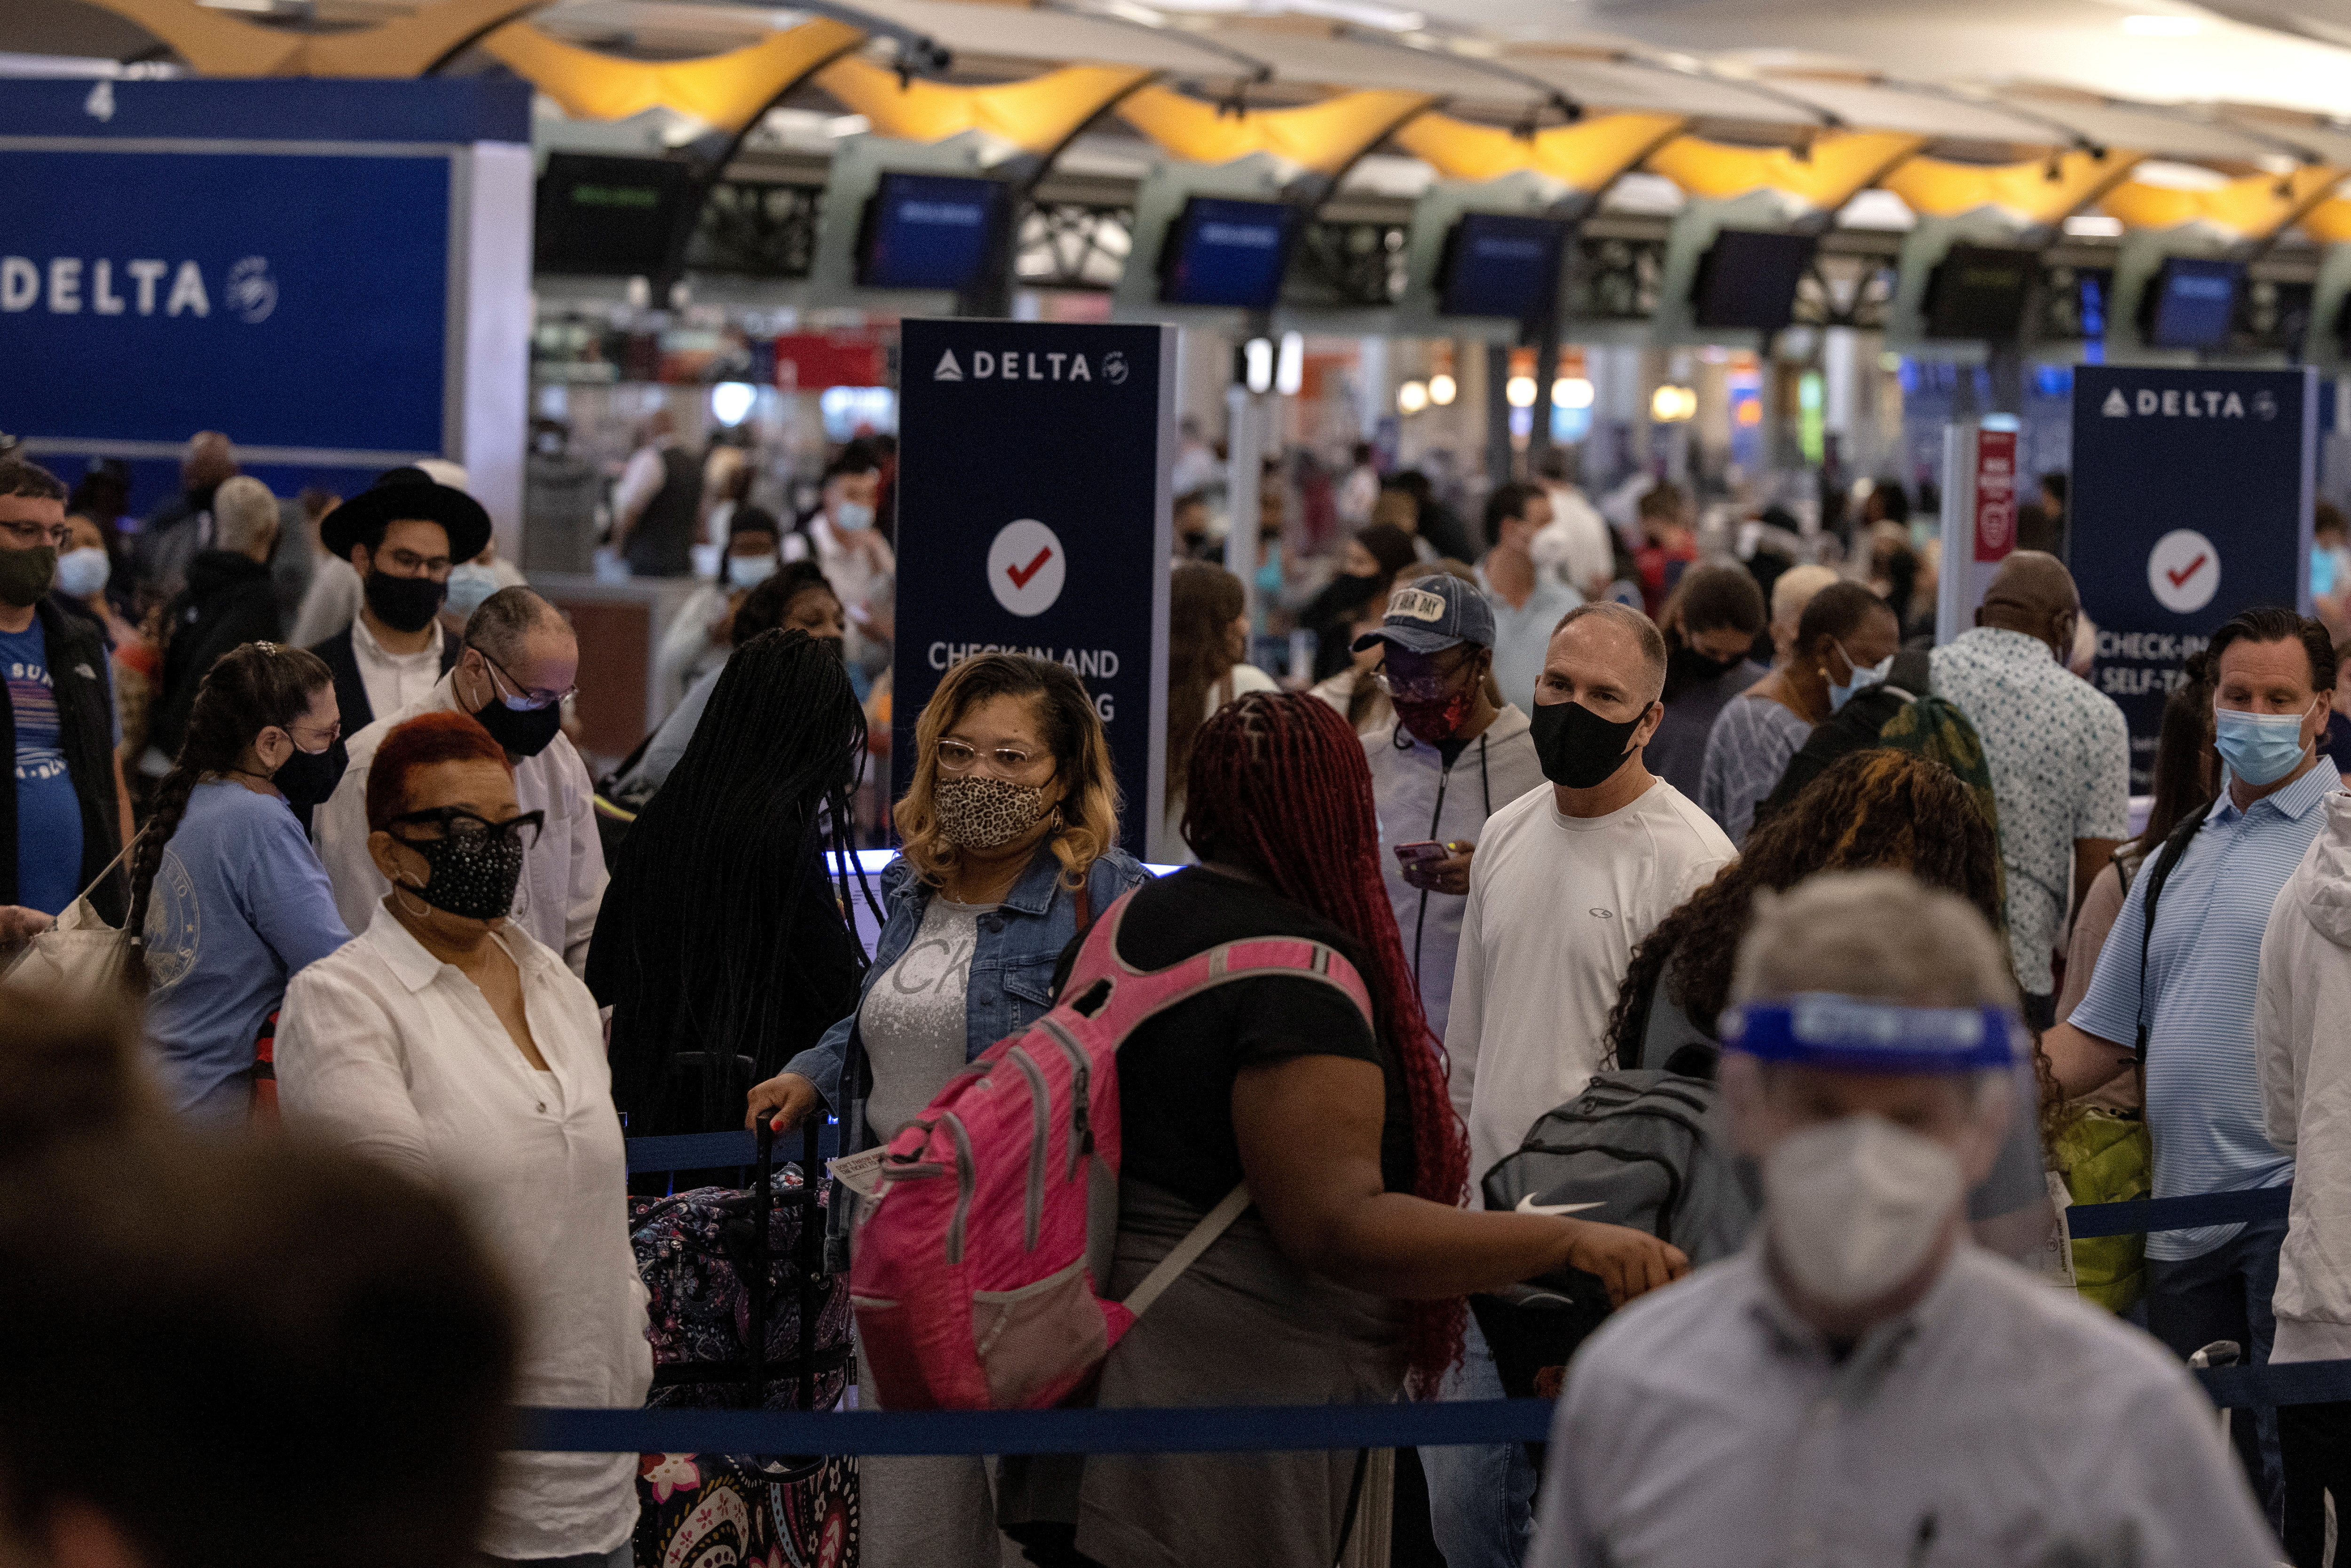 Passengers gather near Delta airline's counter as they check-in their luggage at Hartsfield-Jackson Atlanta International Airport, in Atlanta